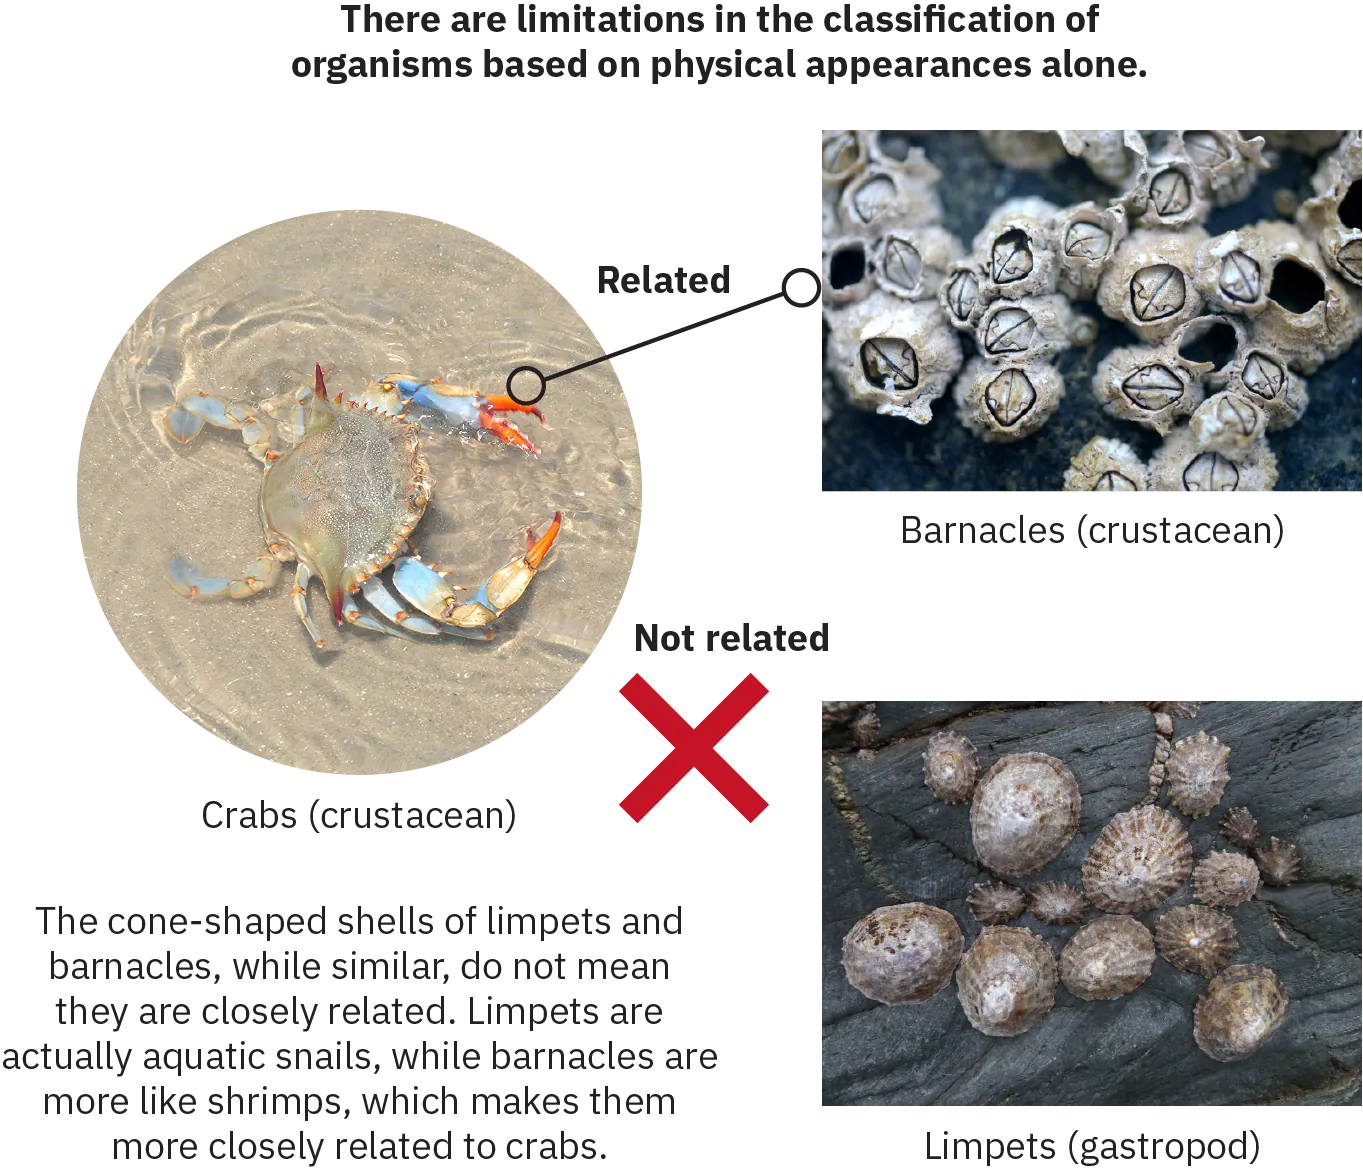 Infographic with three main sections: barnacles, crabs, and limpets. The barnacles, identified as crustaceans, and the limpets, identified as gastropods, have similar forms - both a small round cluster of creatures with hard shells. The crab. also identified as a crustacean, has distinct legs and large pincers. A line between the crab and the barnacles is labelled “related.” An X appears between the limpets and crab, with the words “not related.” Text on the graphic reads “The cone-shaped shells of limpets and barnacles, while similar, do not mean they are closely related. Limpets are actually aquatic snails while barnacles are more like shrimps, which makes them more closely related to crabs. ”